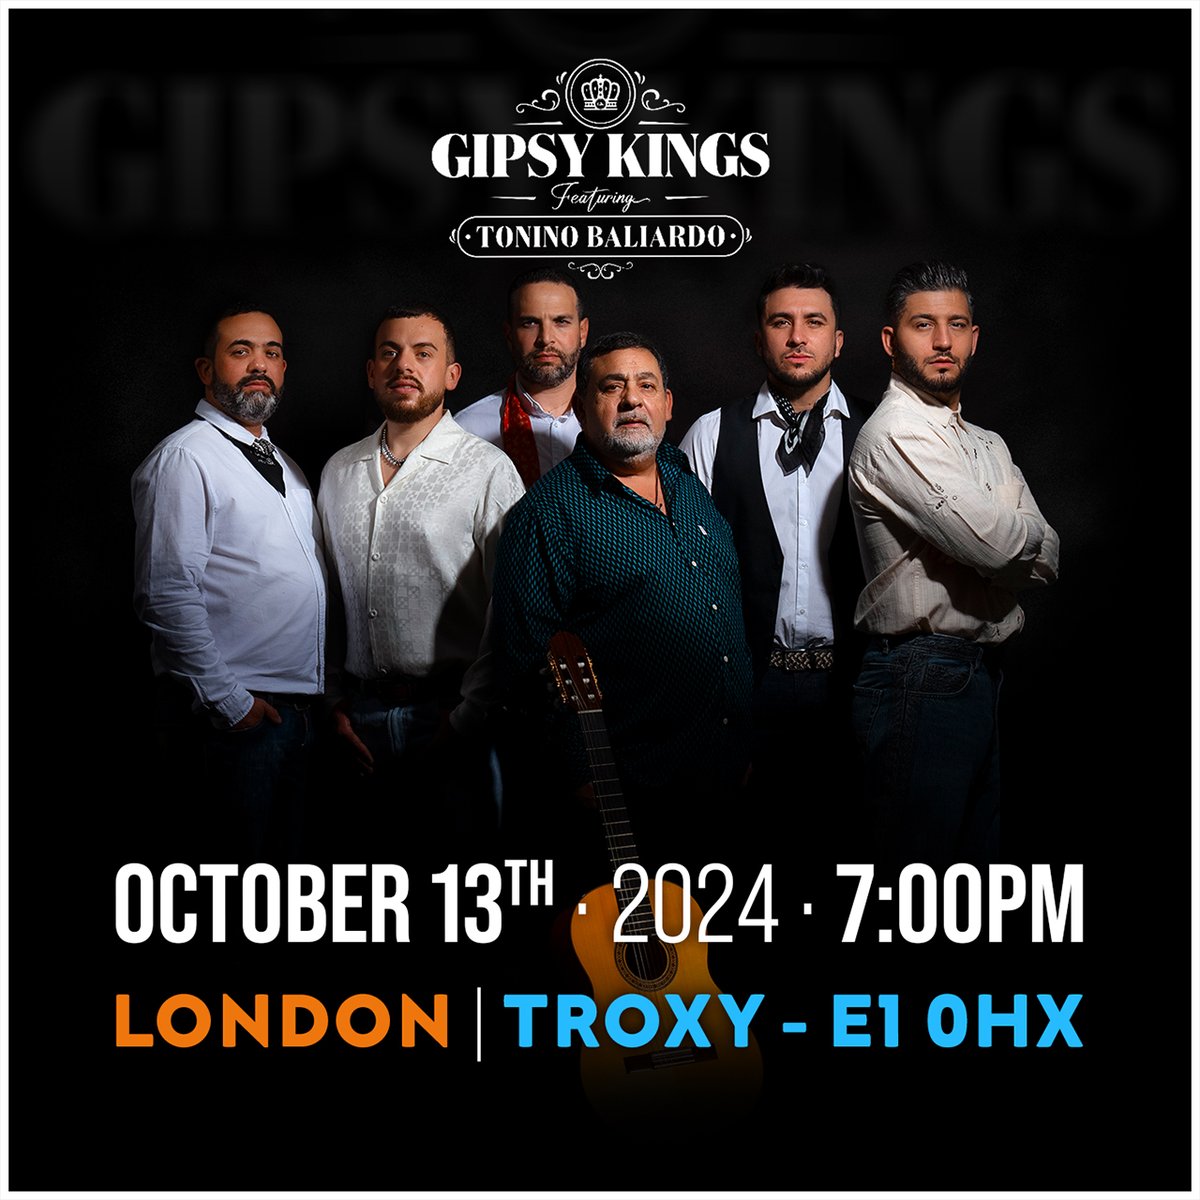 Best known for combining traditional flamenco styles with Western pop and Latin rhythm, Grammy award winning band @gipsykings featuring #ToninoBaliardo play on our famed stage this October. 💃🕺 Tickets >>> link.dice.fm/b241bfe4bc13 #gipsykings #gipsykingstour #londongigs